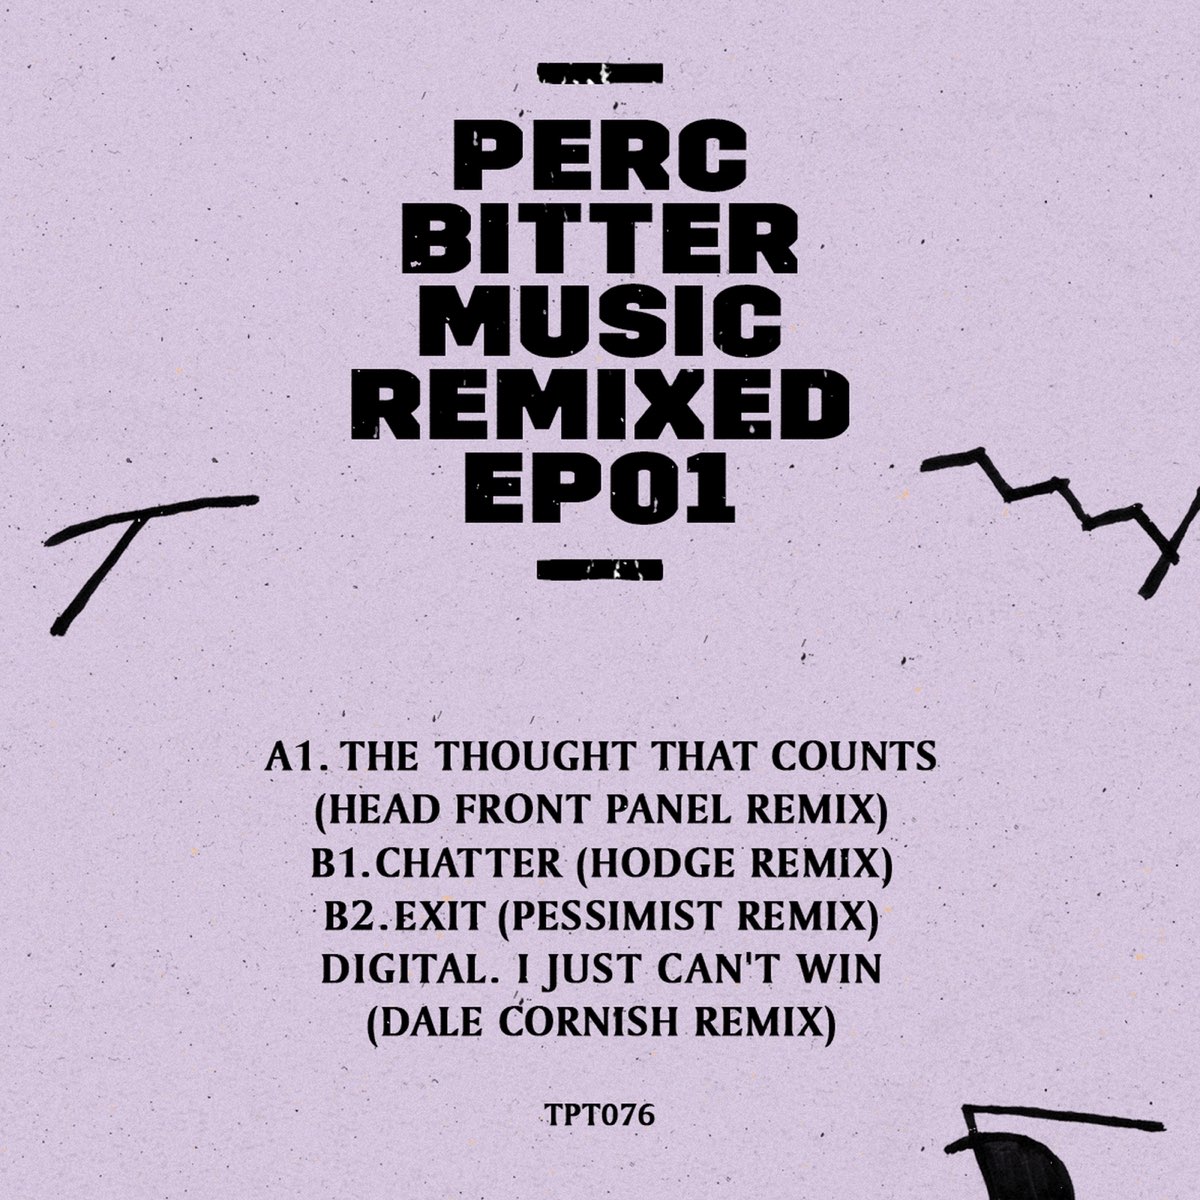 Bitter Music Remixed EP01 by Perc.